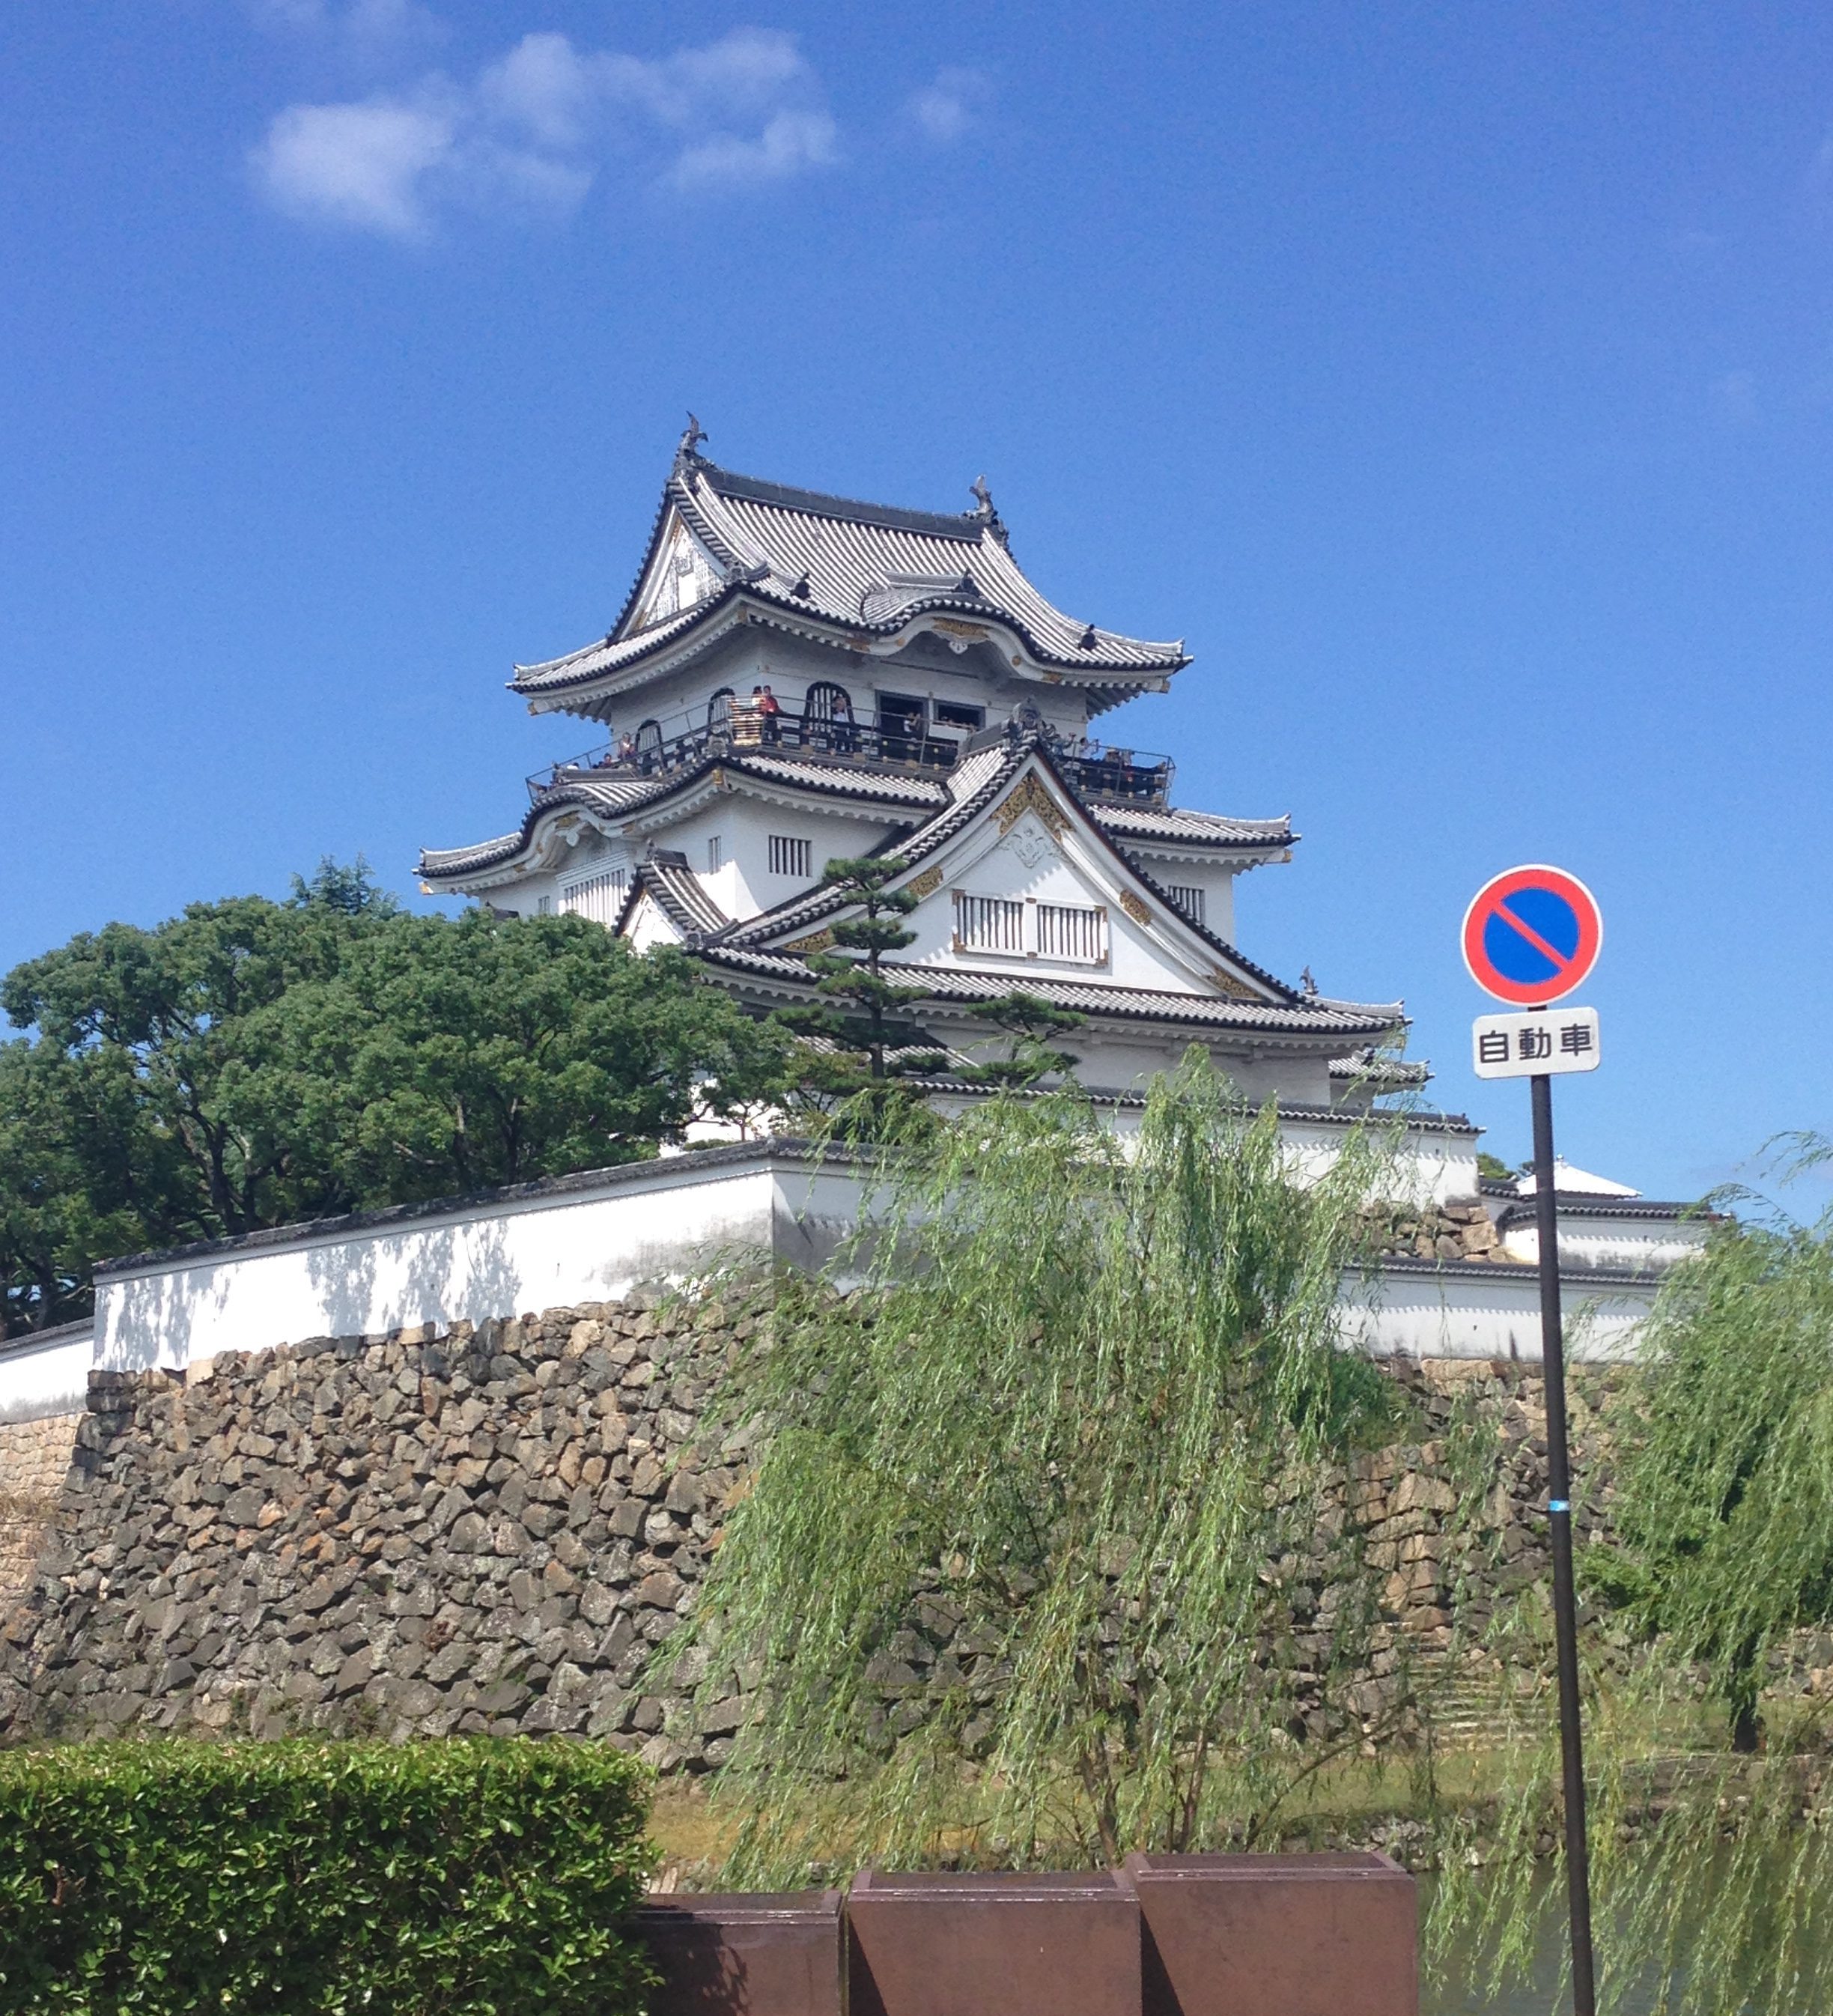 Kishiwada Castle on a bright and clear day